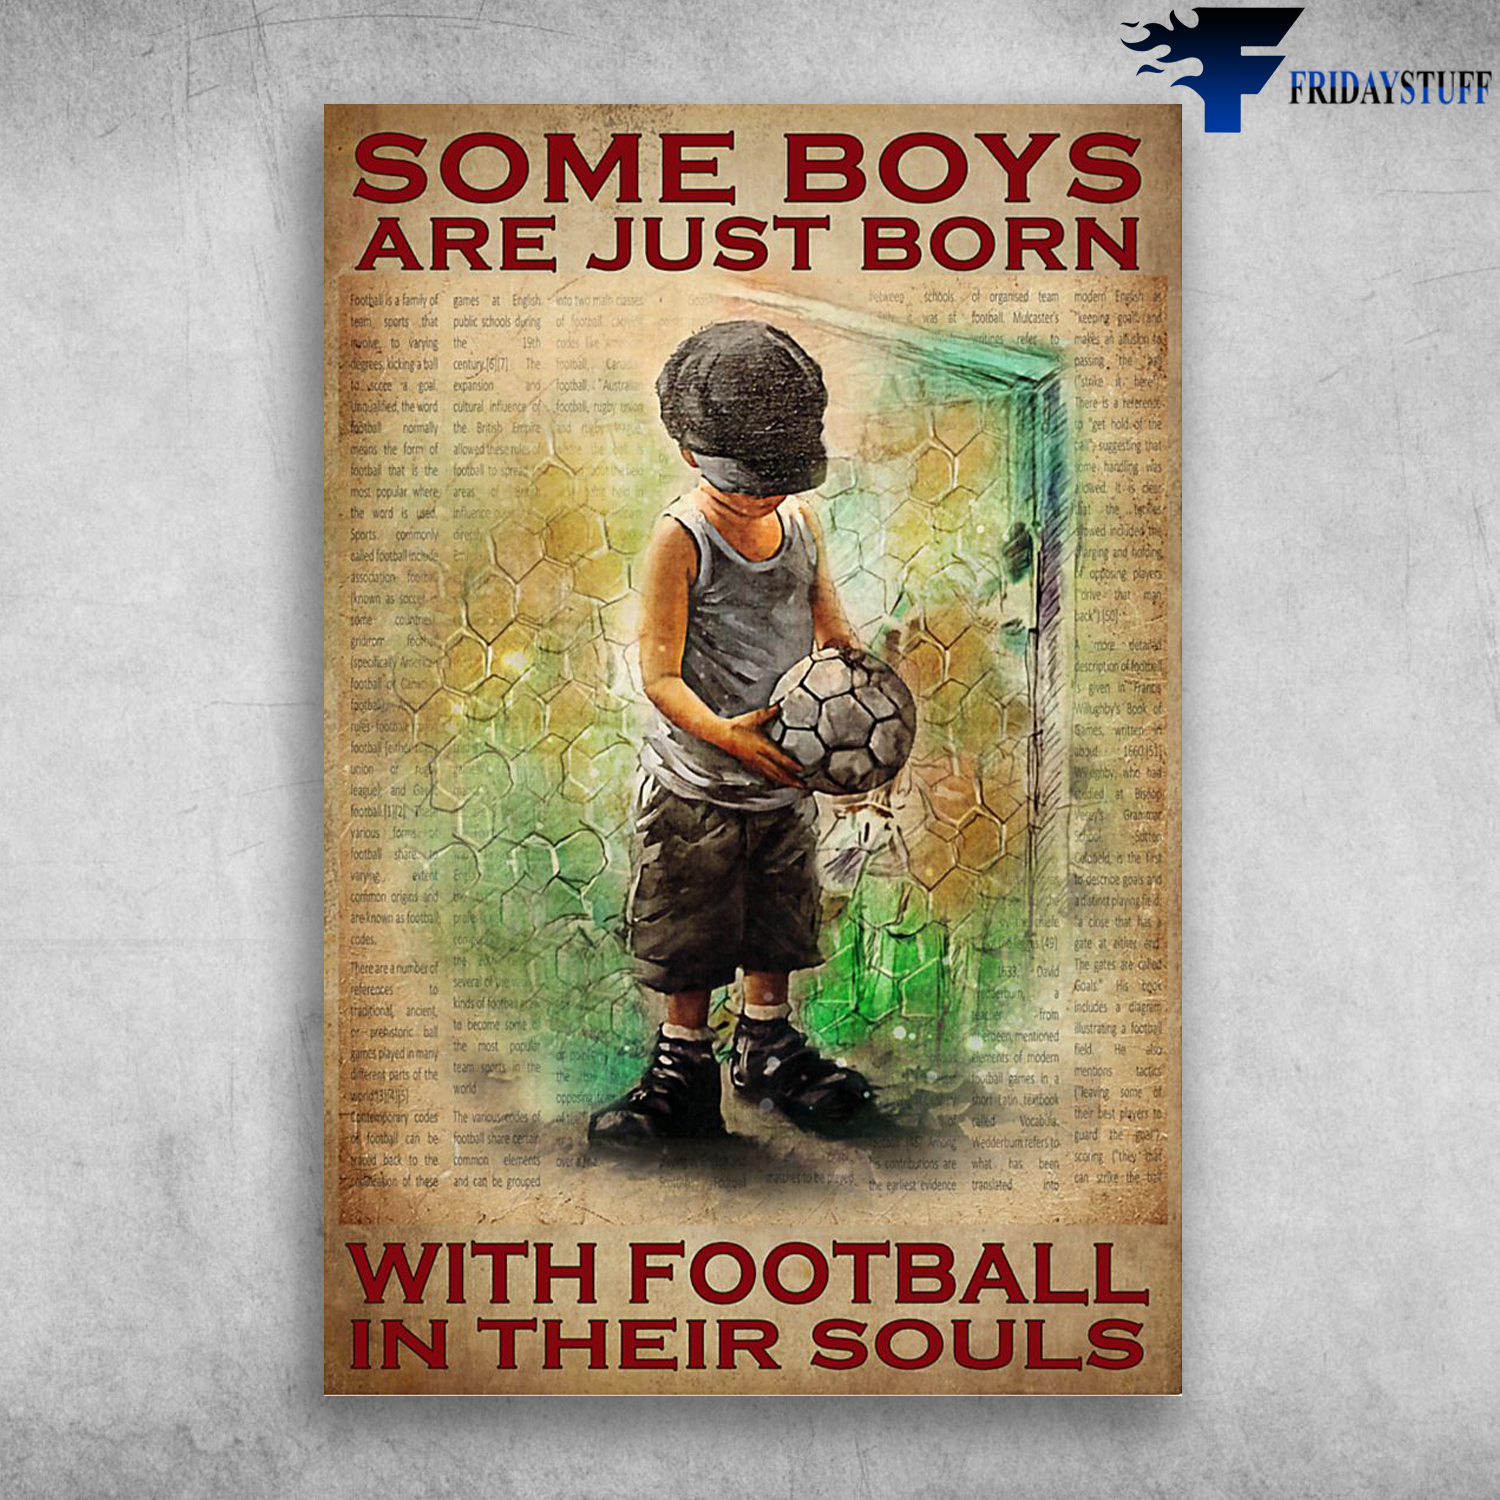 The Boy Playing Football - Some Boys Are Just Born Wirh Footbal In Their Souls